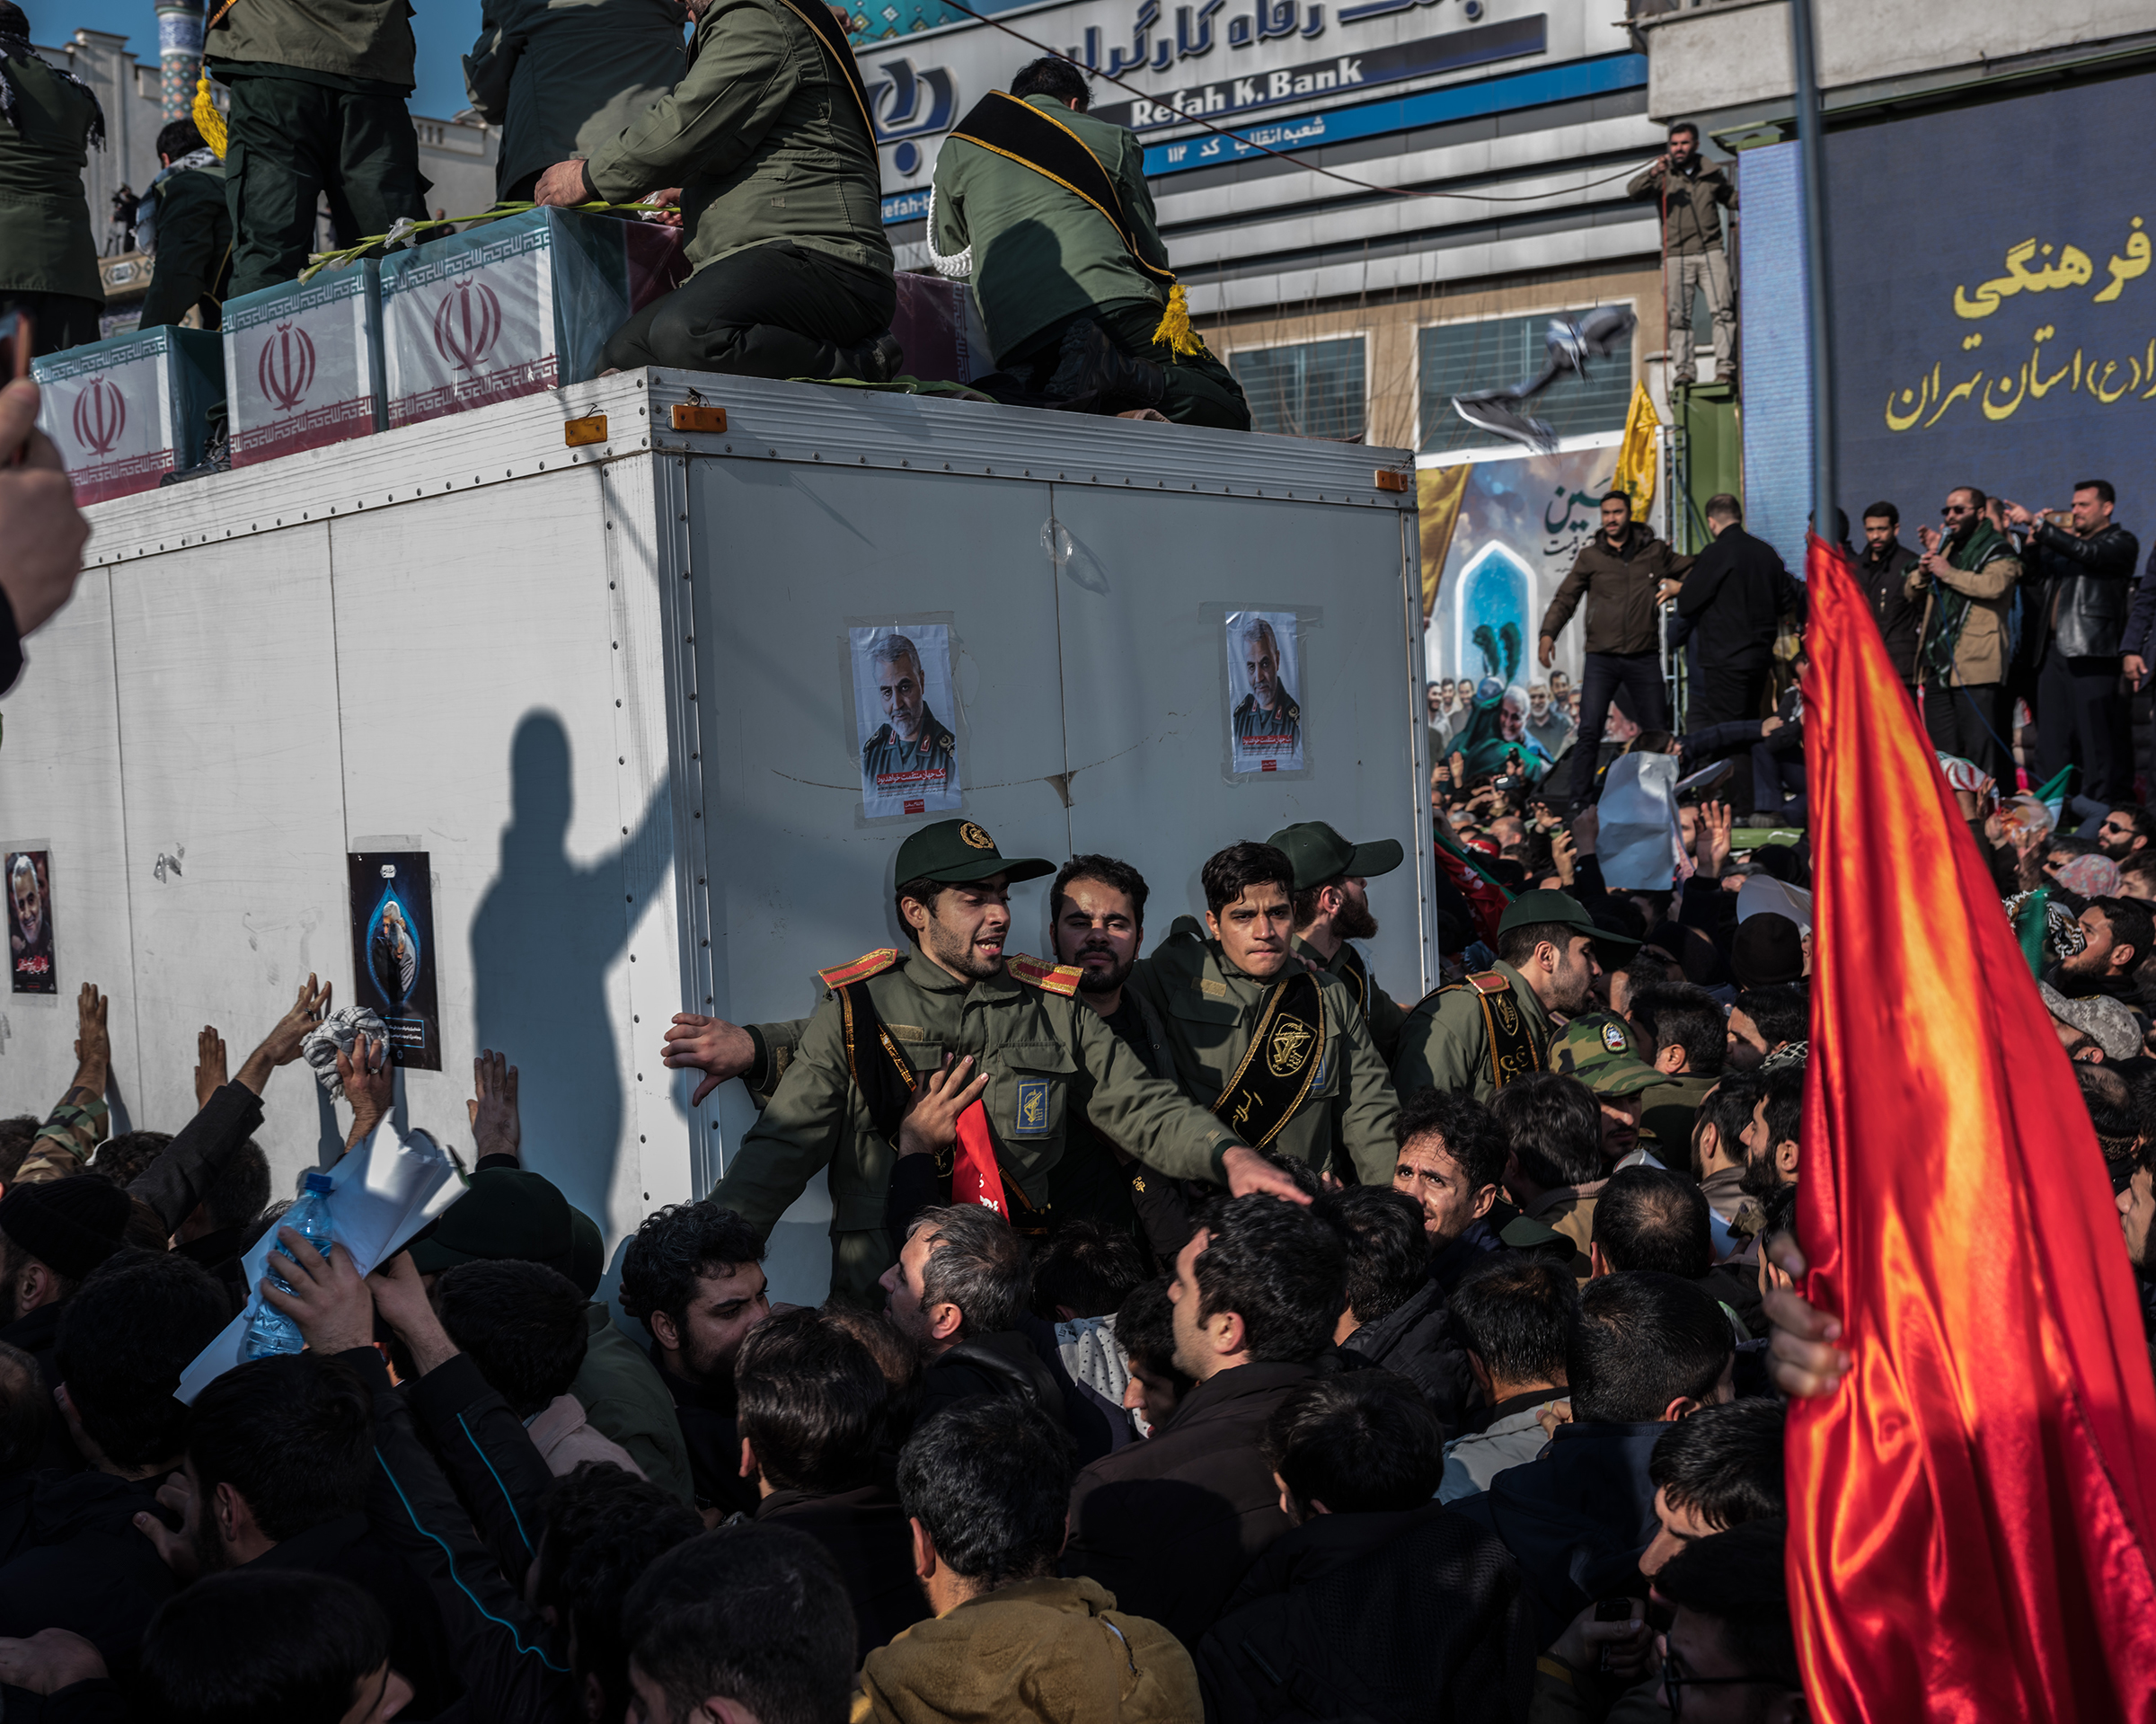 Soleimani’s coffin is surrounded by throngs in Tehran’s Enghelab Square on Jan. 6. (Newsha Tavakolian—Magnum Photos for TIME)